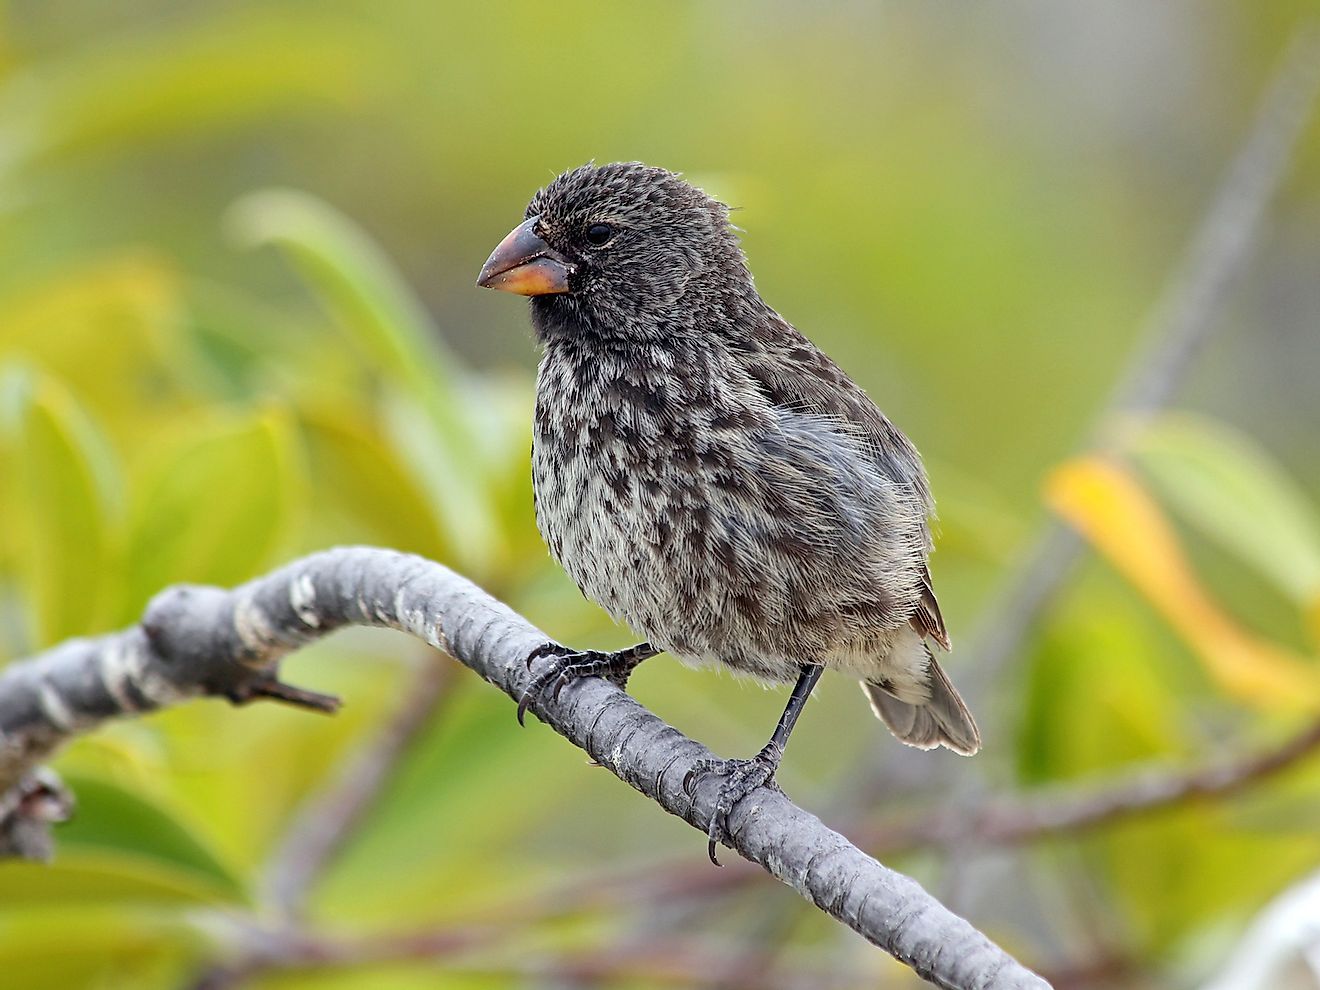 A Darwin's Finch (also known as the Galapagos Finch or as Geospizinae) in the Galapagos Islands. Image credit: Ryan M. Bolton/Shutterstock.com